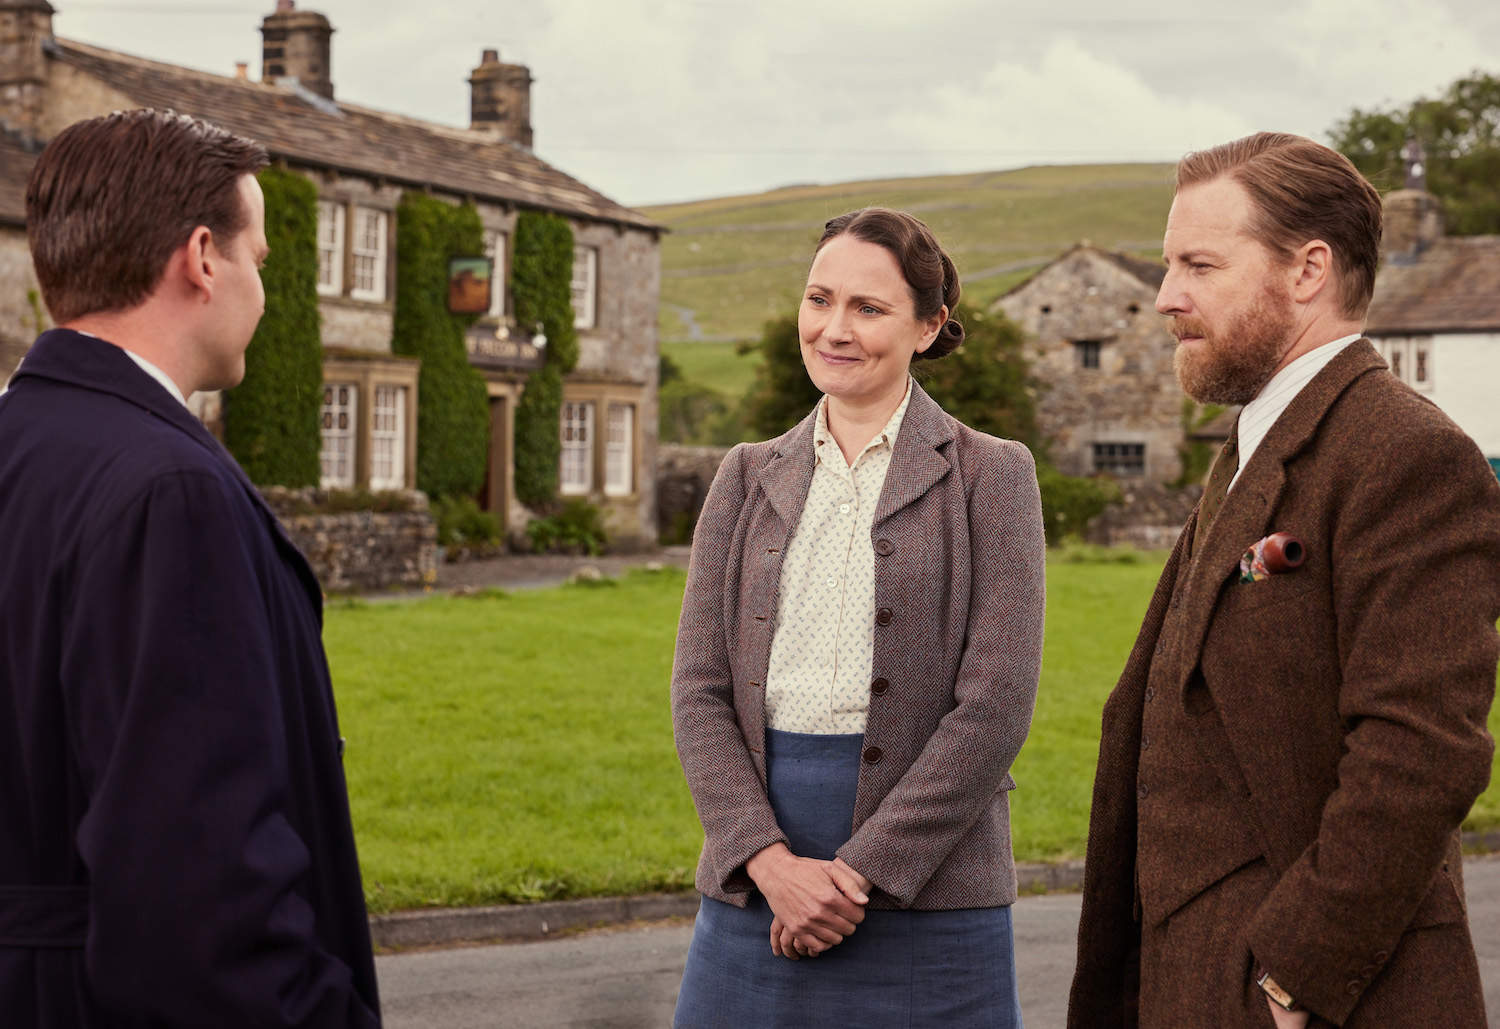 Samuel West, Anna Madeley and Nicholas Ralph in "All Creatures Great and Small" Season 4